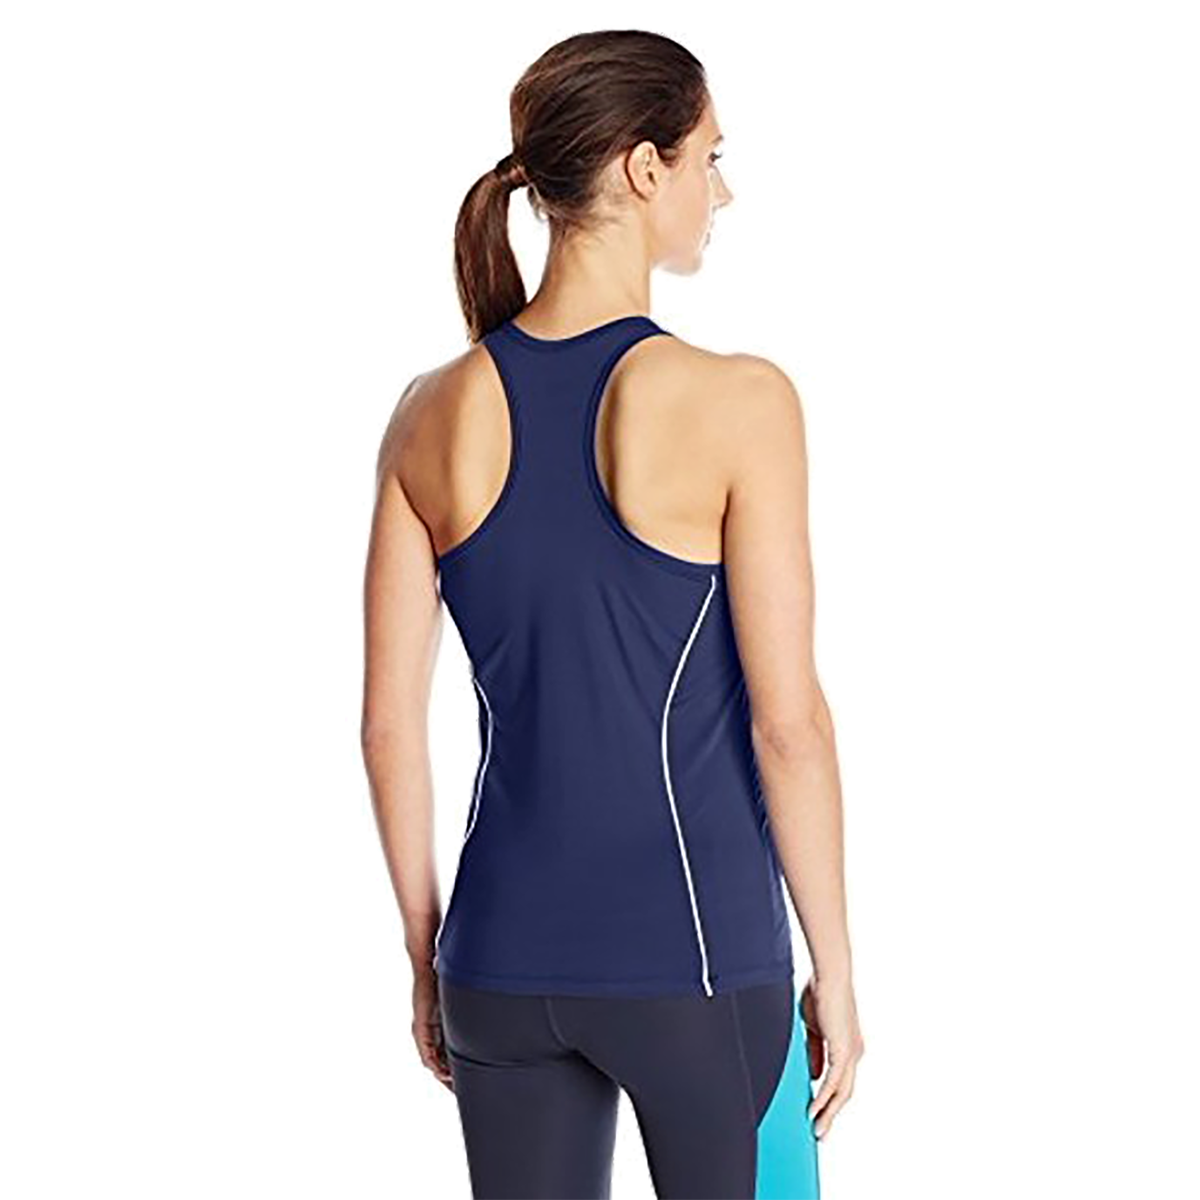 Asics Attacker Tank, , large image number null